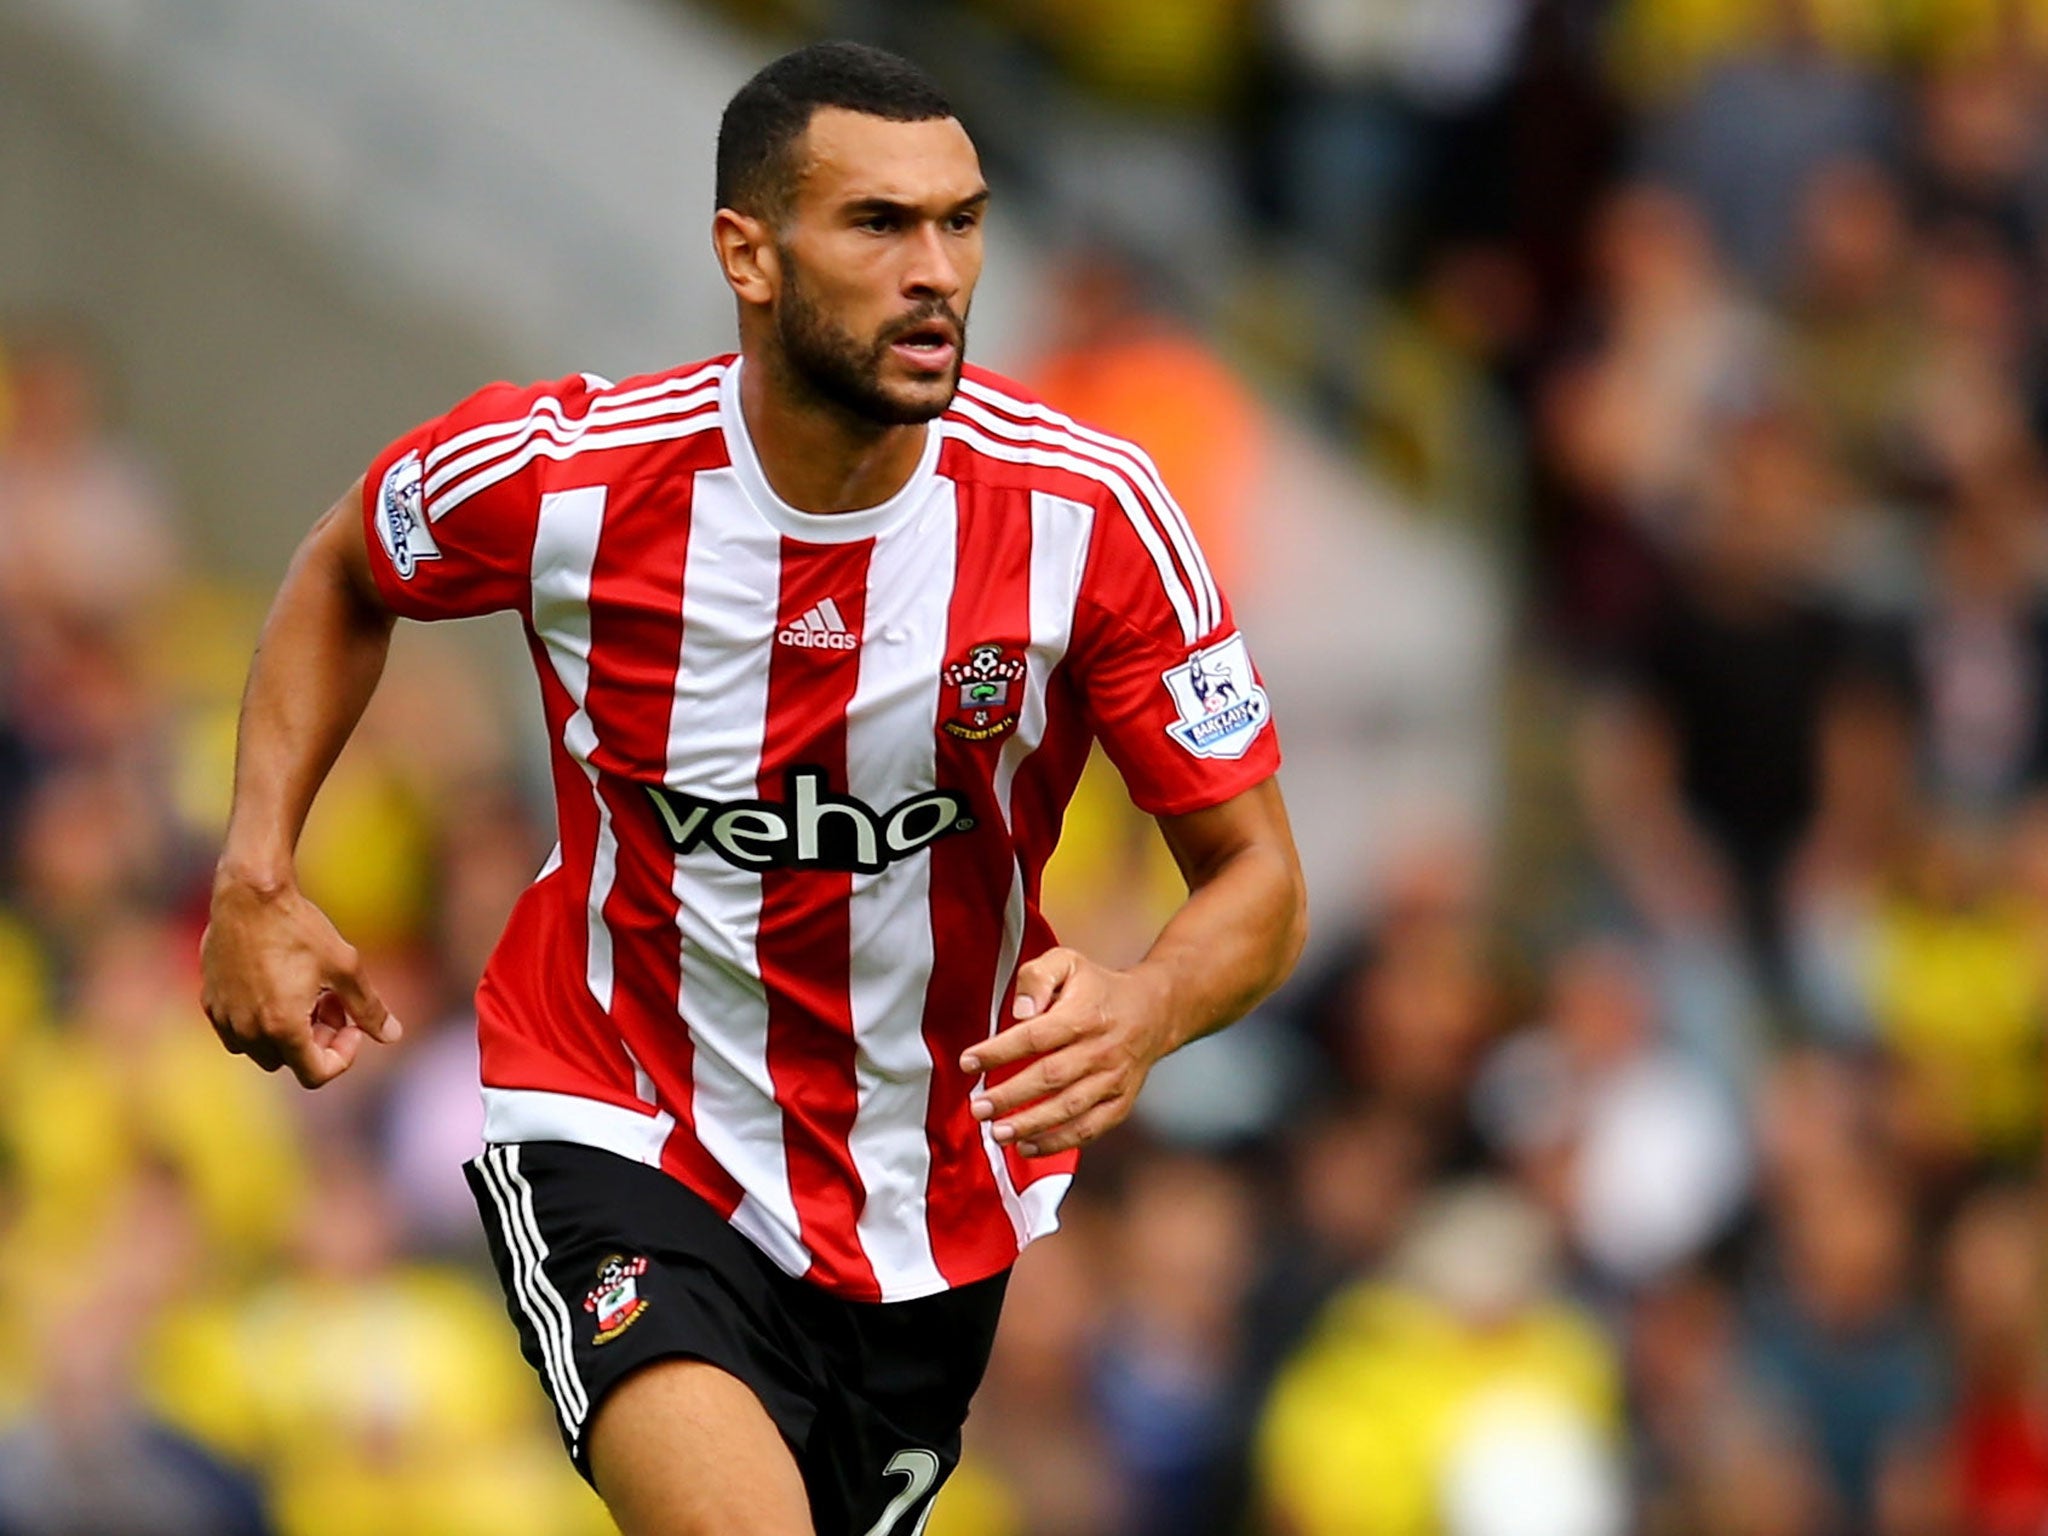 Steven Caulker has joined Liverpool on loan until the end of the season